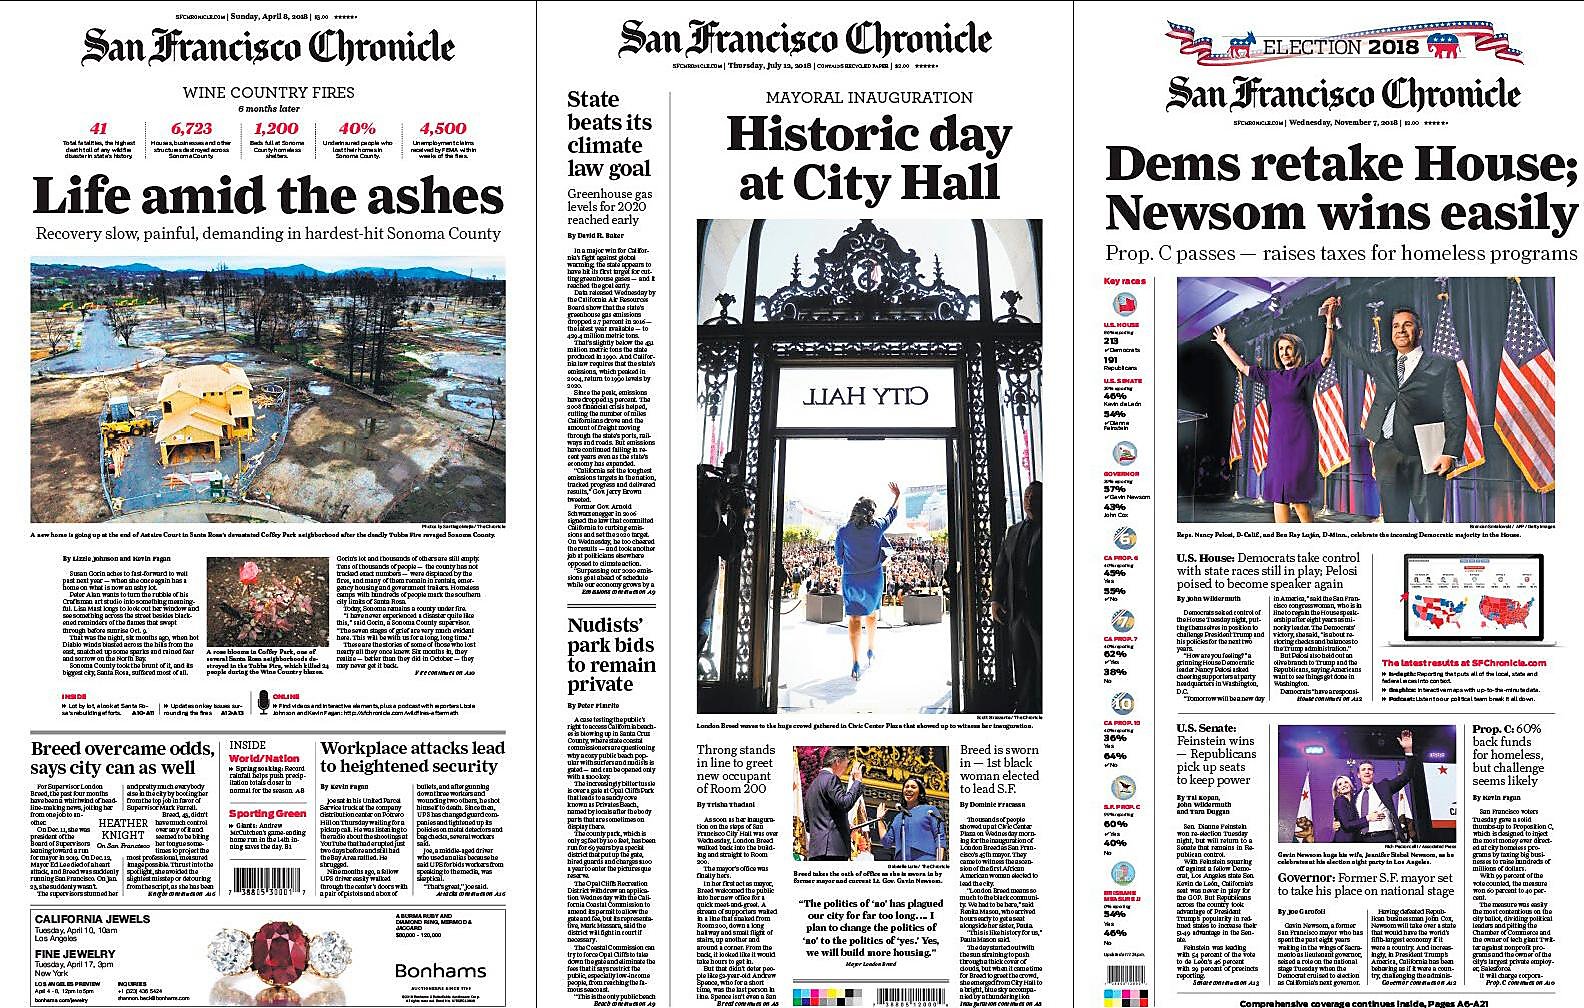 Chronicle named California’s best large newspaper 4th year in a row